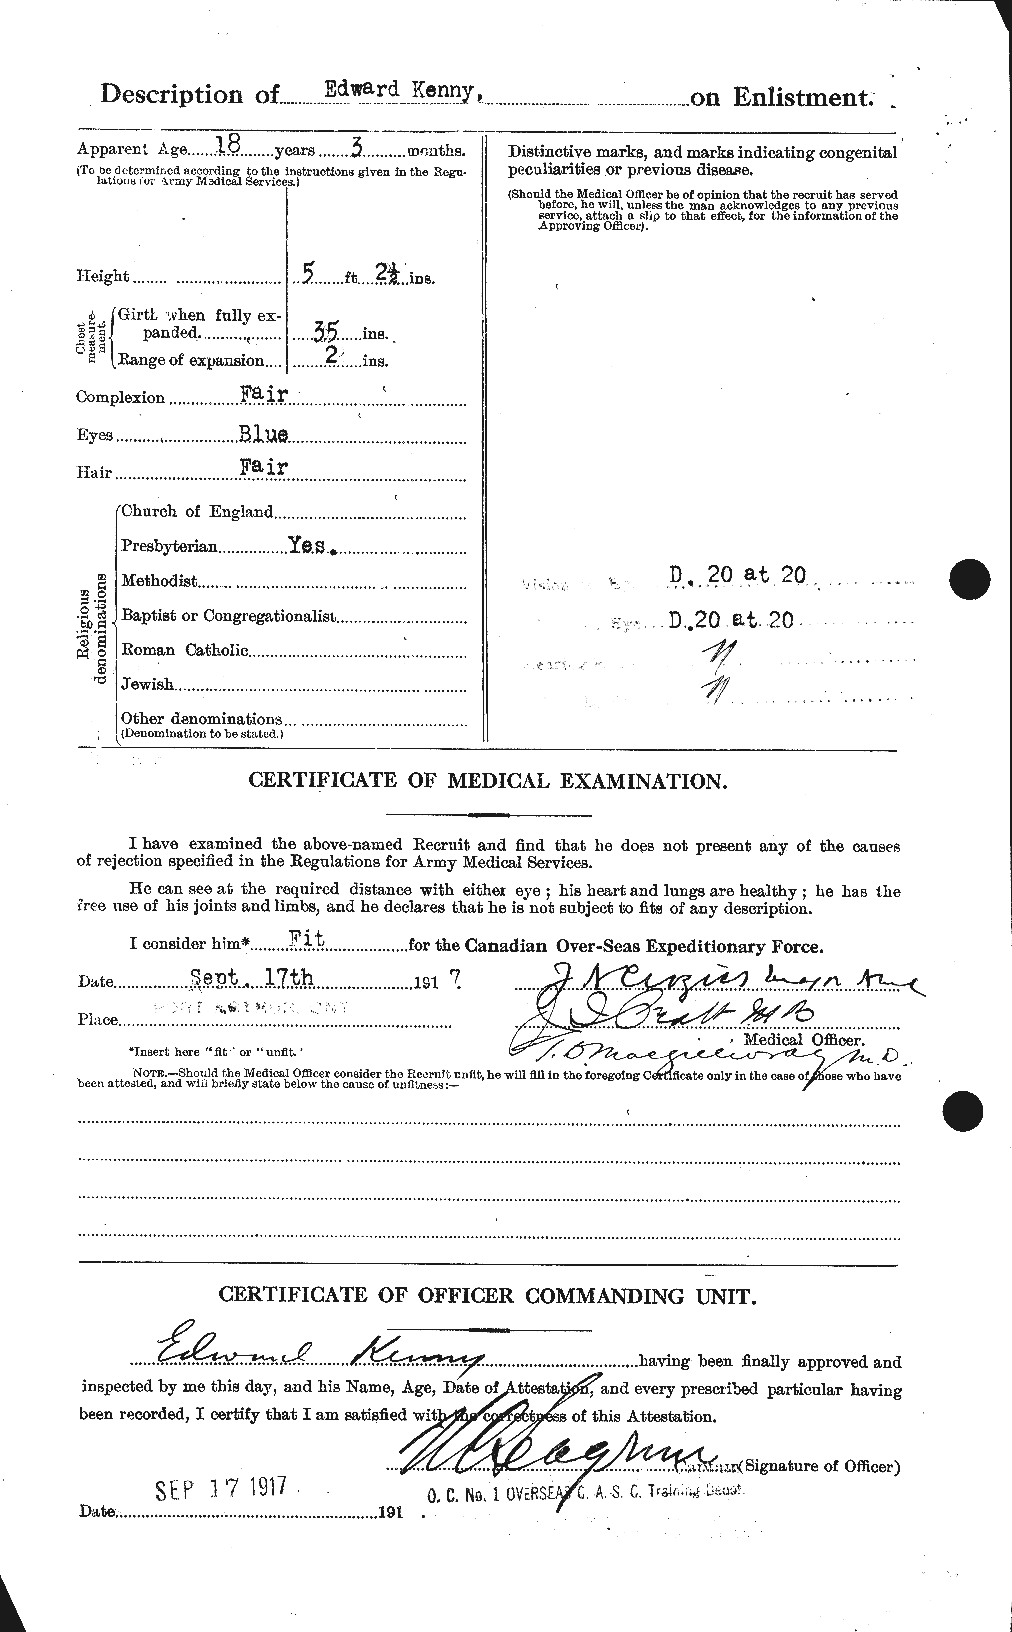 Personnel Records of the First World War - CEF 433013b